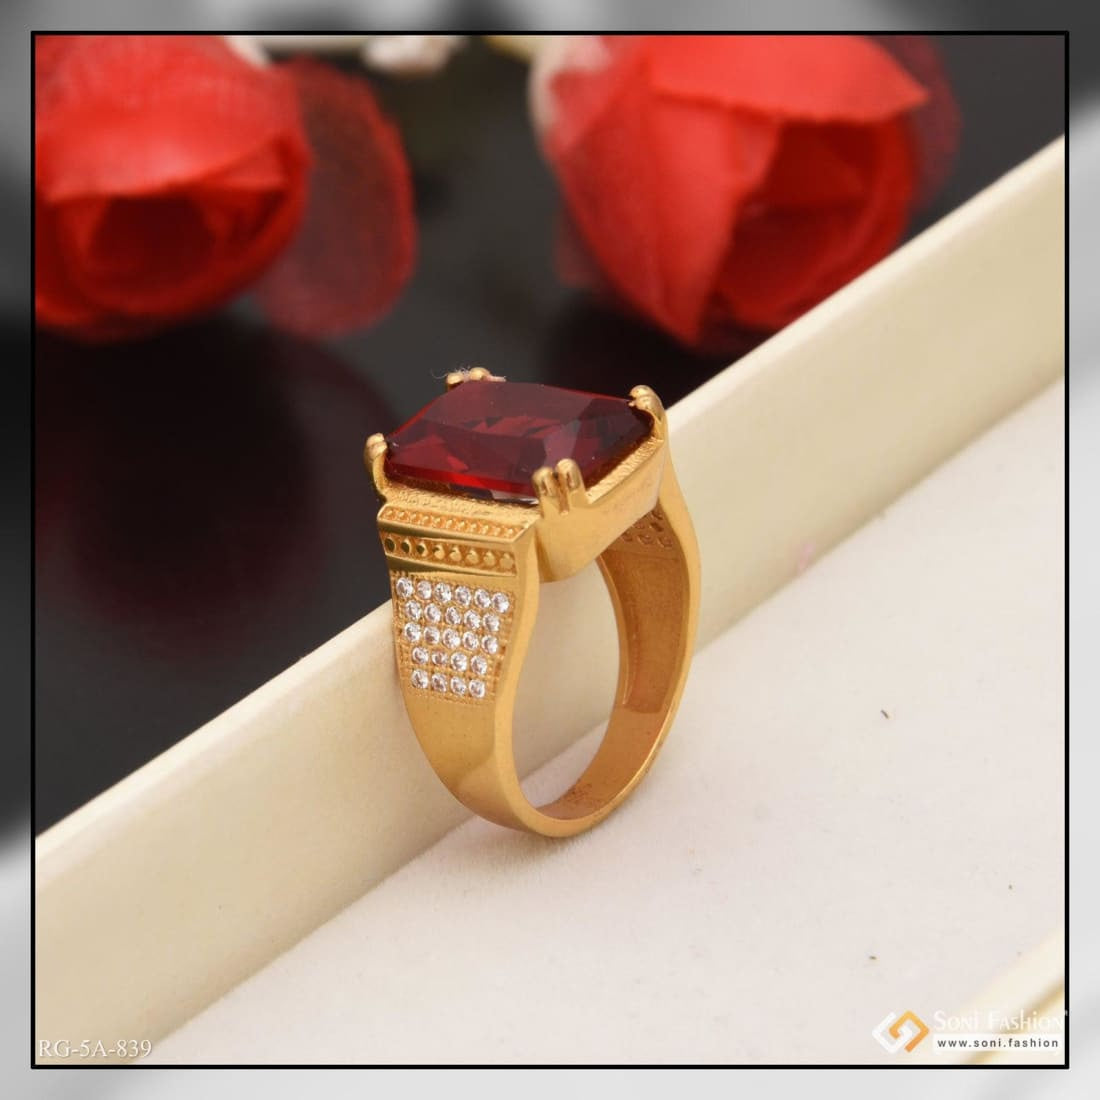 Red Stone with Diamond Best Quality Gold Plated Ring for Men - Style A839 –  Soni Fashion®